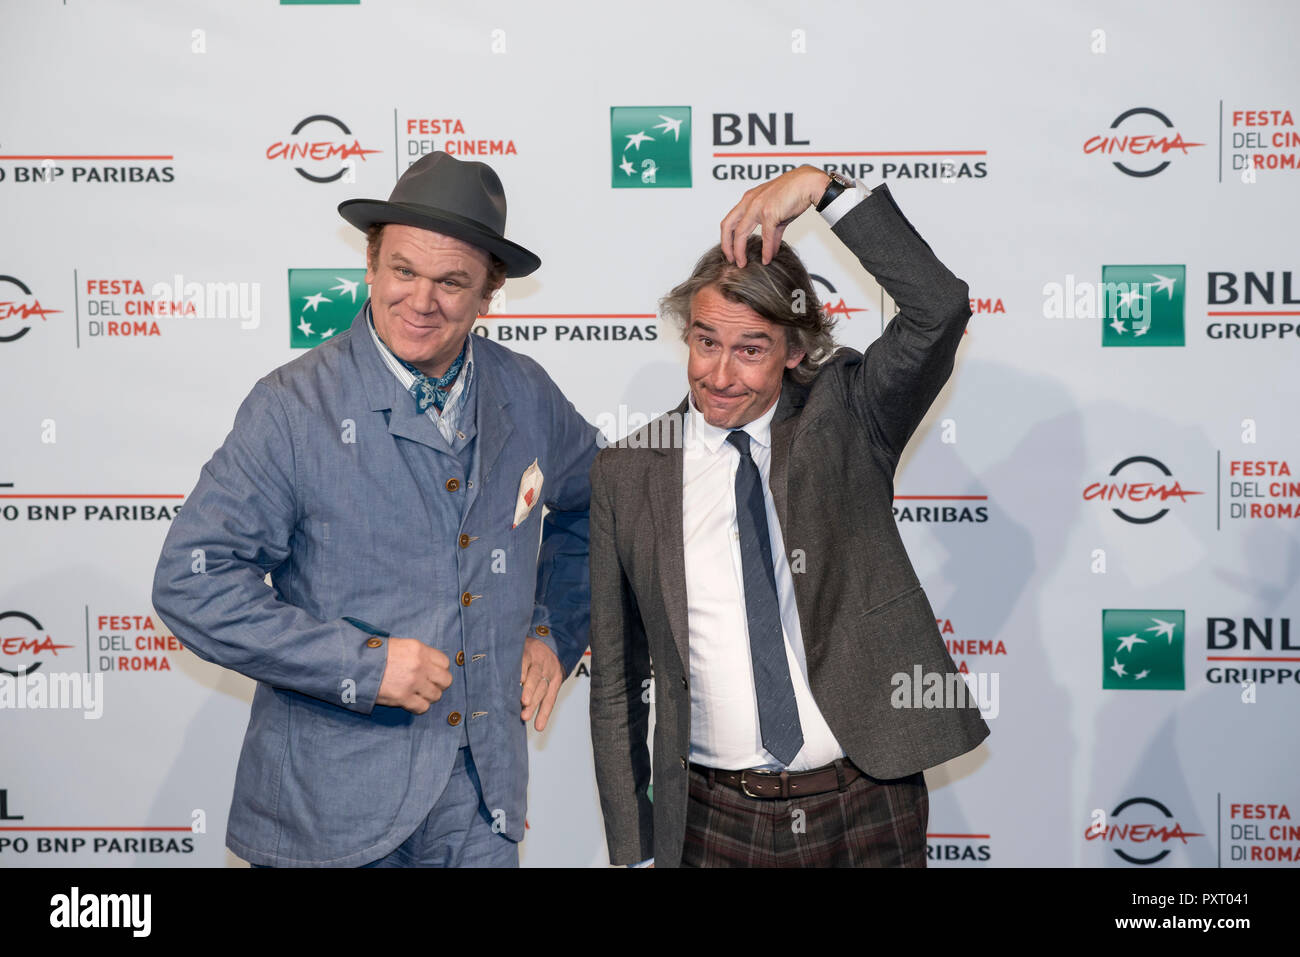 Rome, Italy. 24th Oct 2018. John C. Reilly and Steve Coogan attending the photocall of Stan & Ollie at Rome Film Fest 2018 Credit: Silvia Gerbino/Alamy Live News Credit: Silvia Gerbino/Alamy Live News Stock Photo